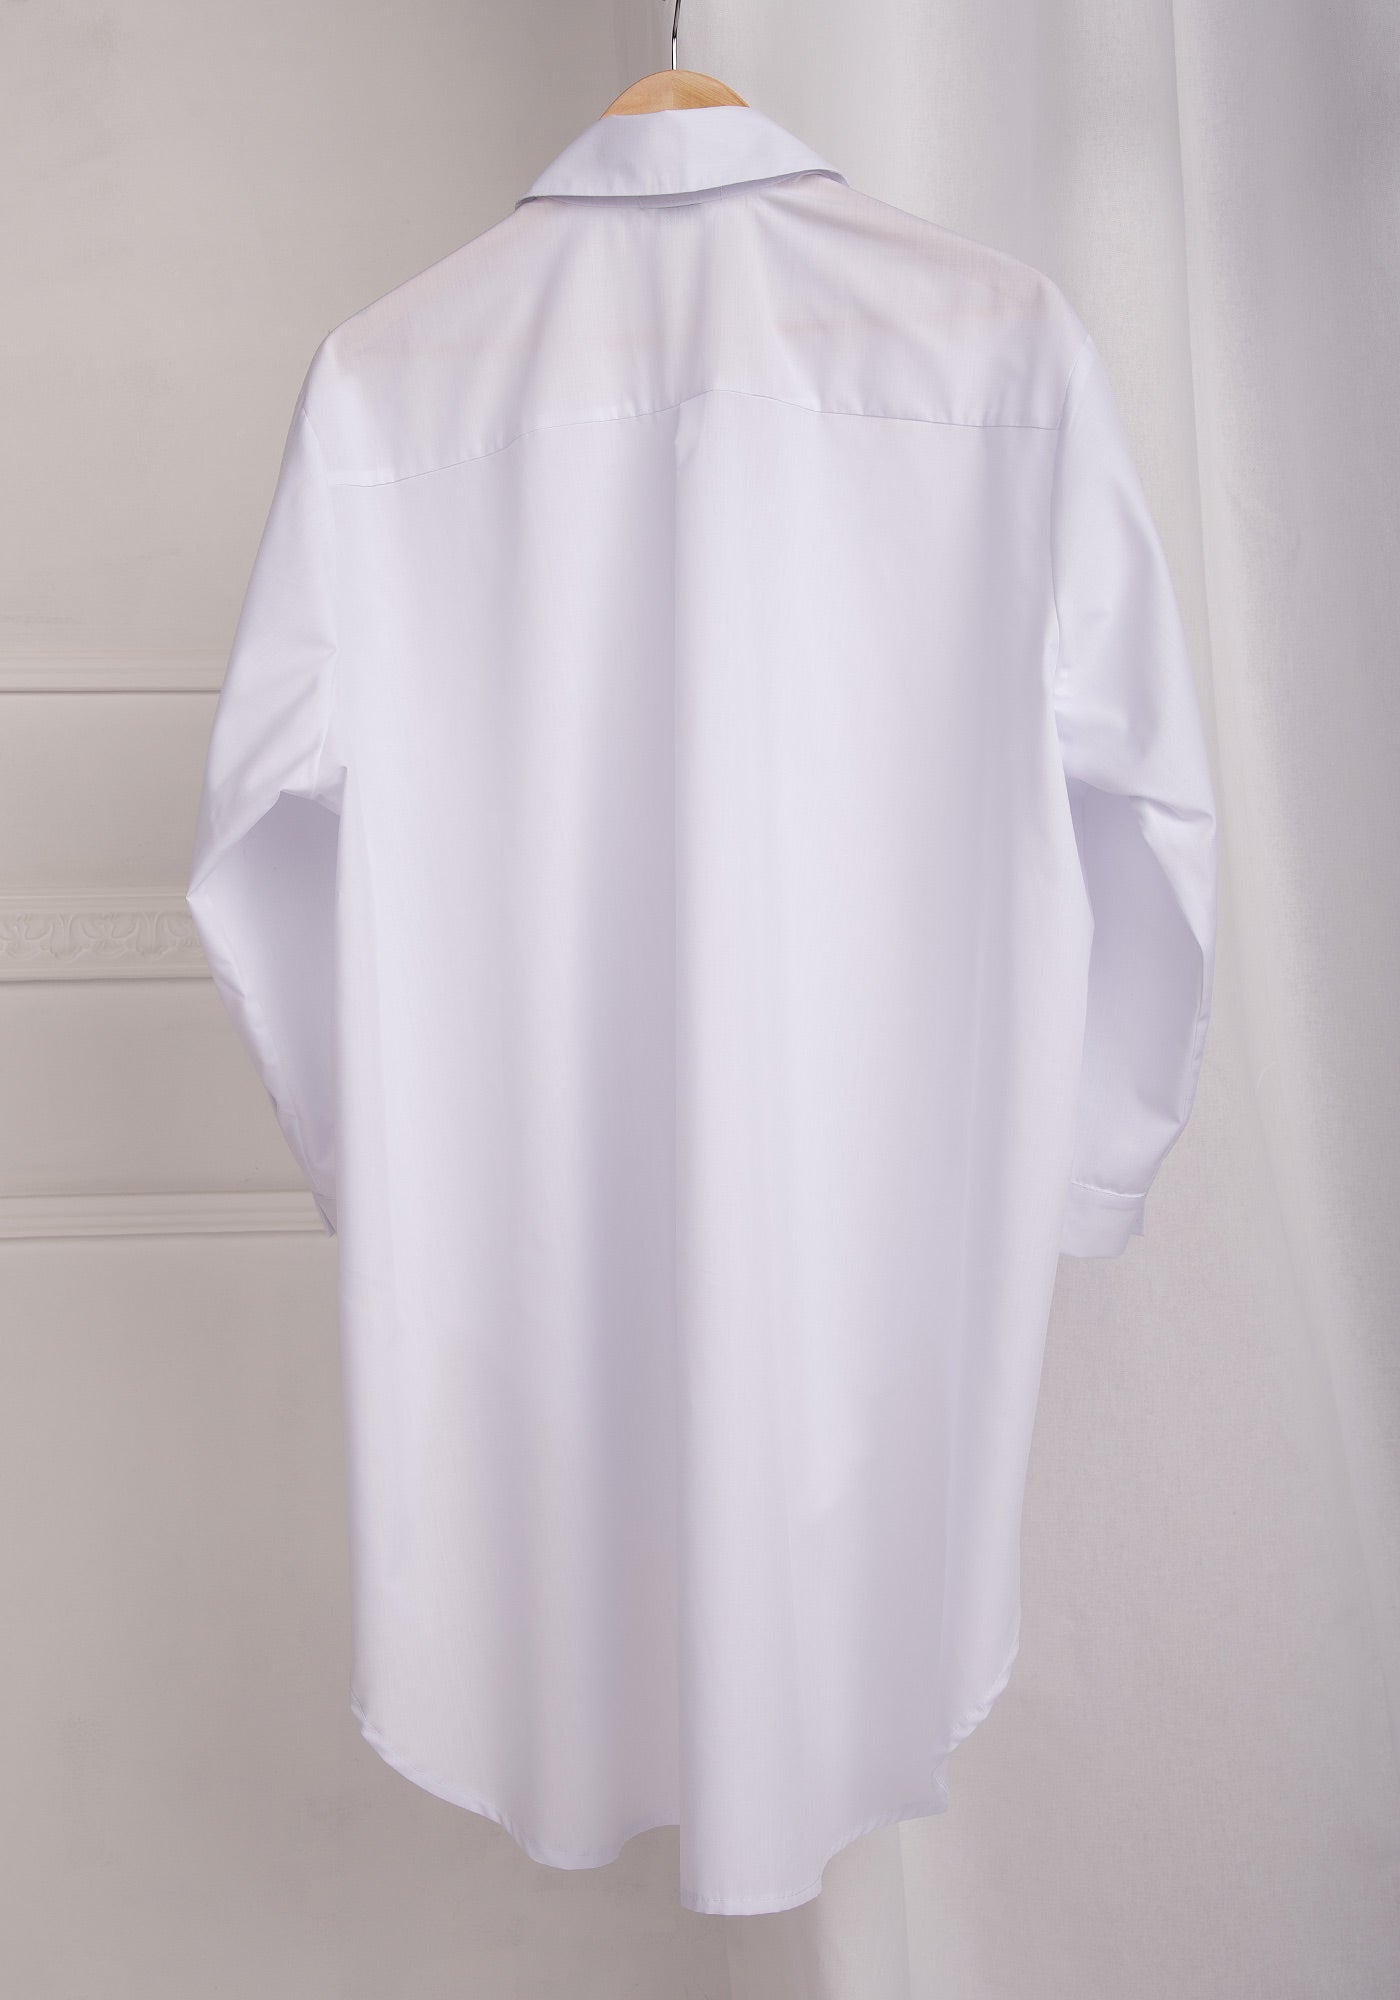 Women's Oversized Button up Shirt in White Cotton Blend